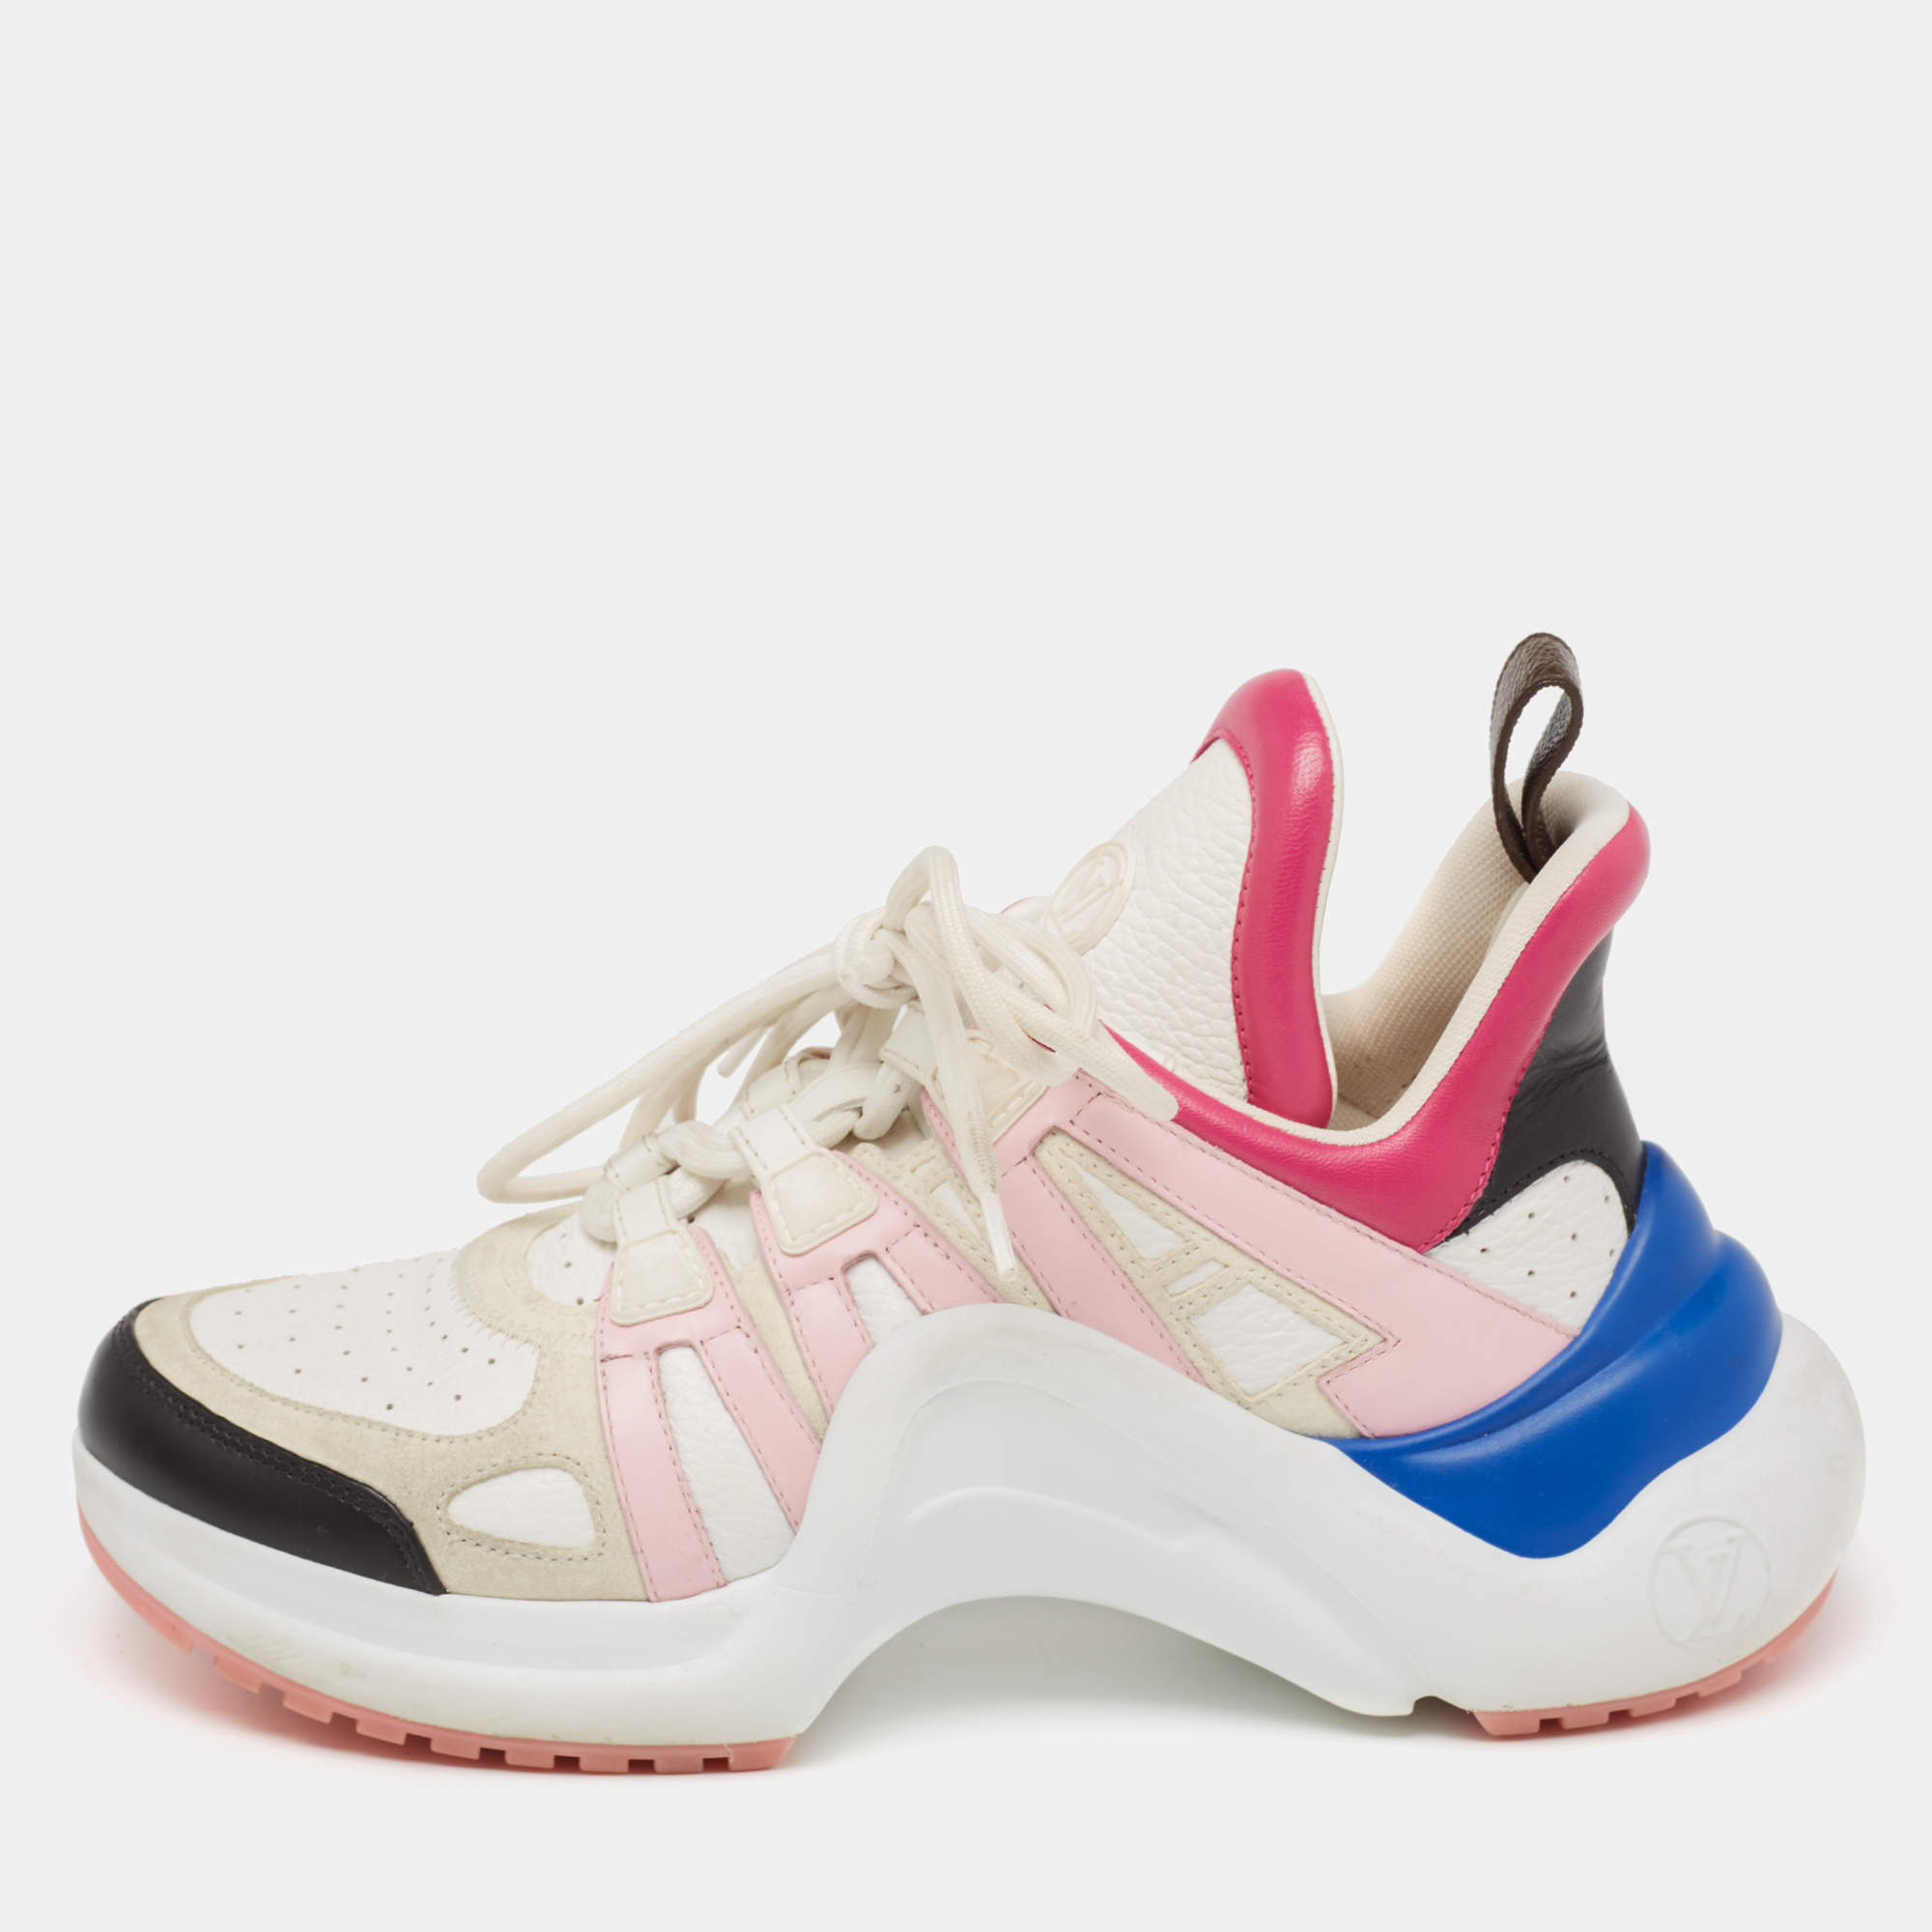 vuitton sneakers archlight pink